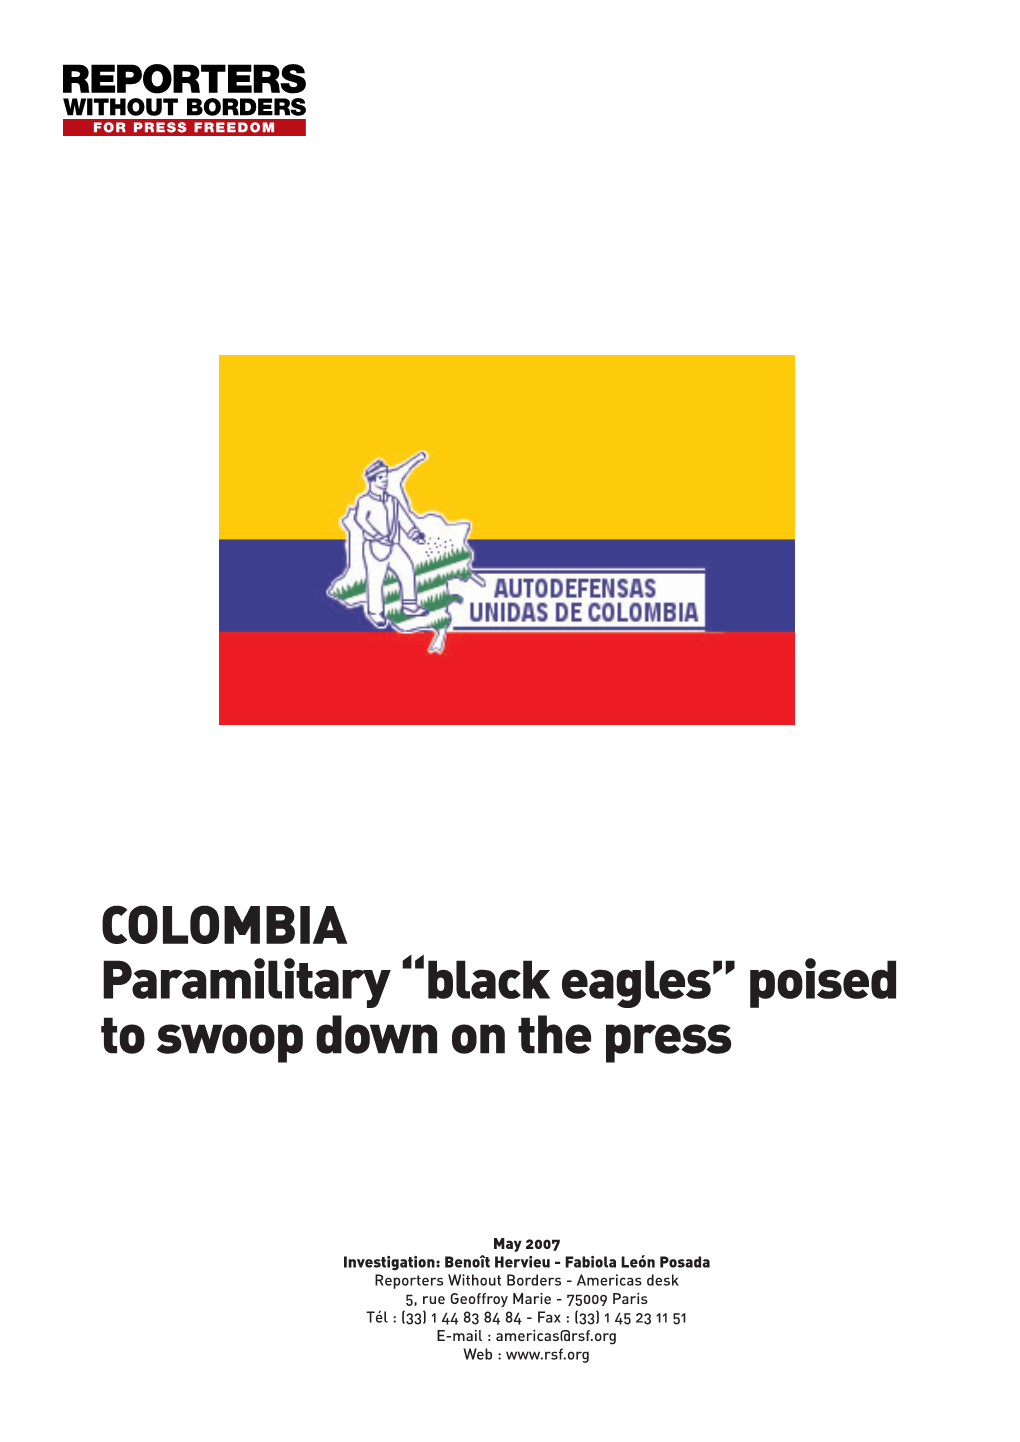 COLOMBIA Paramilitary “Black Eagles” Poised to Swoop Down on the Press